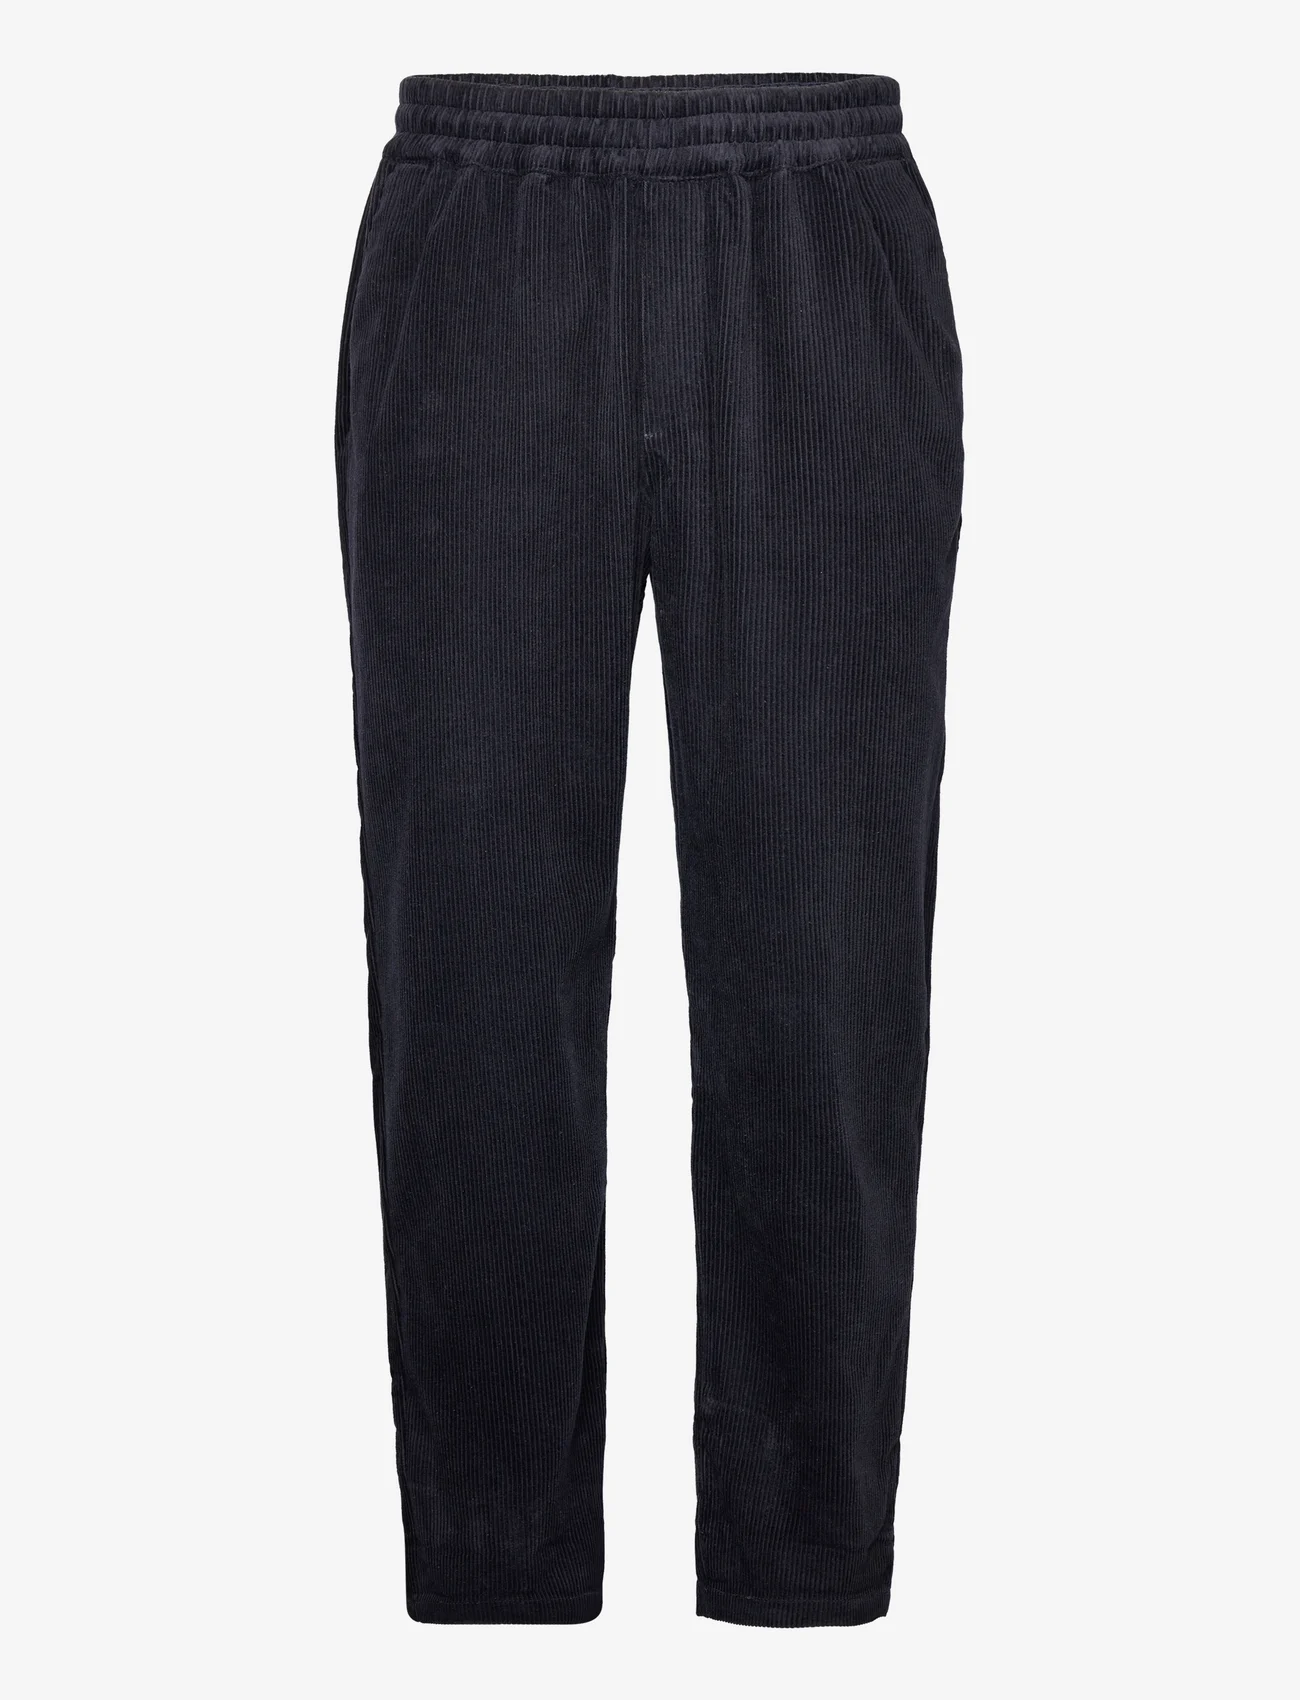 Revolution - Casual Trousers - casual bukser - navy - 0